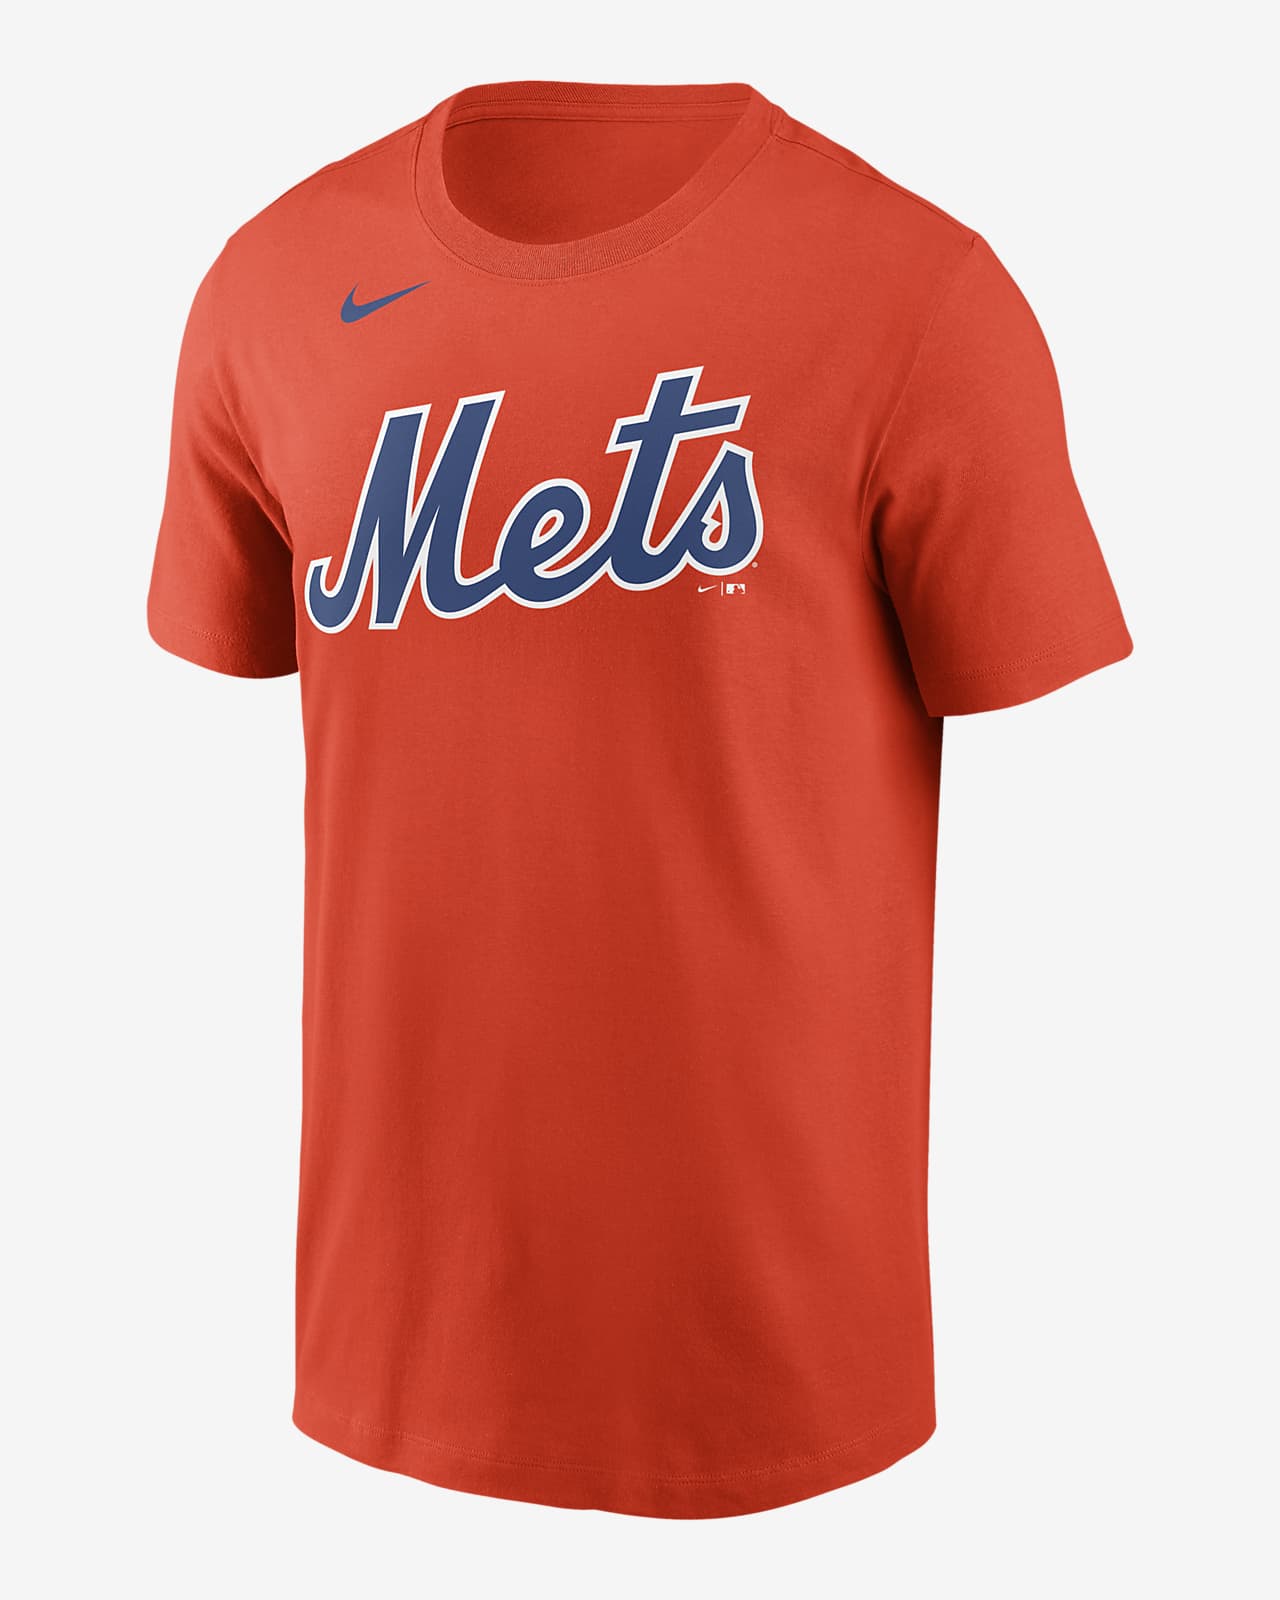 mets tee shirts for sale